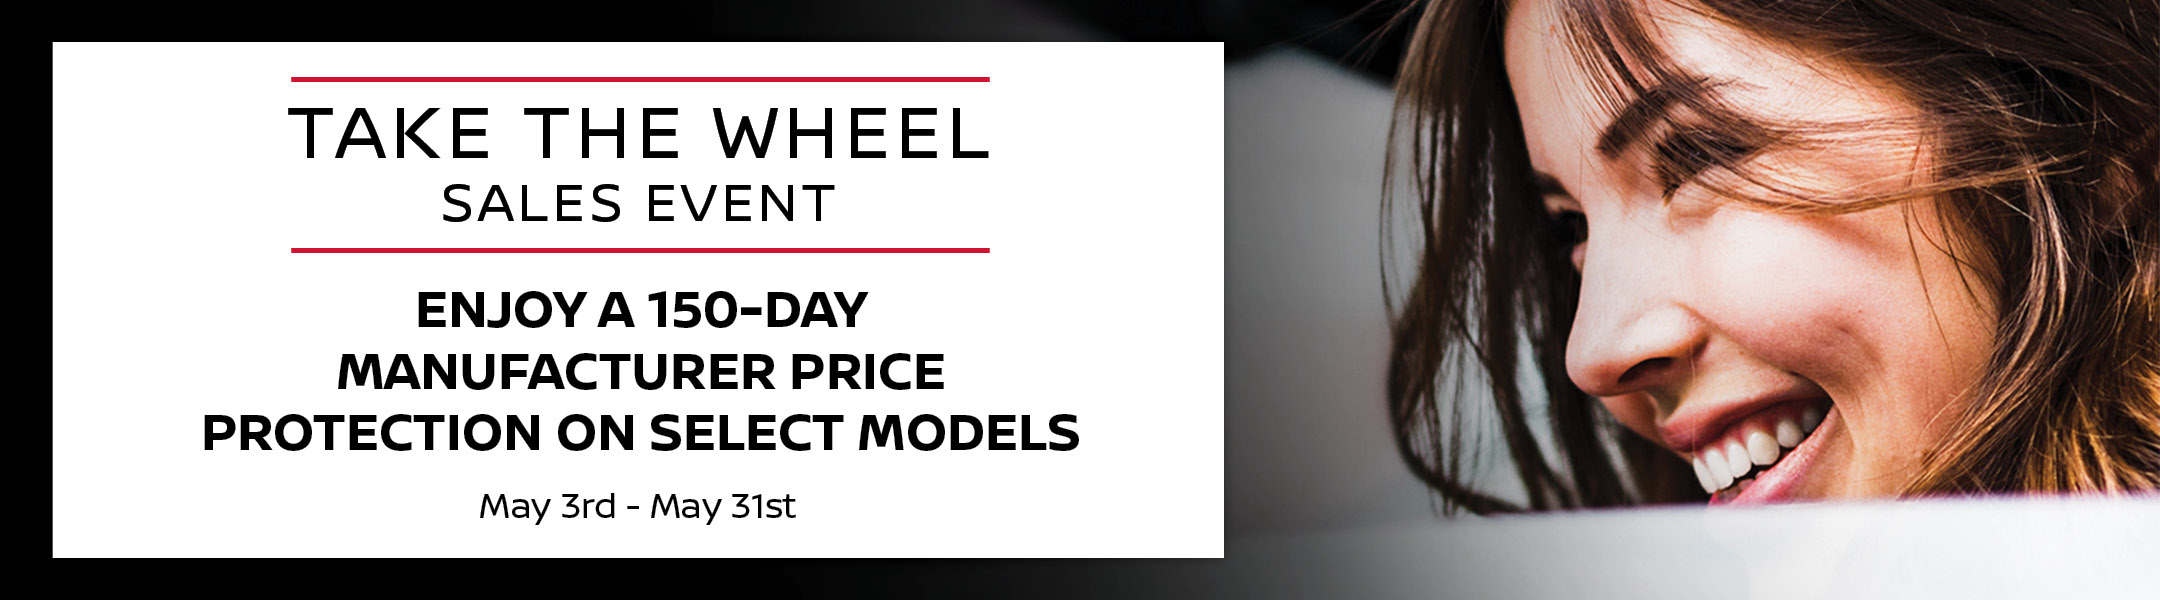 Shop the Sales Event at Avenue Nissan in Toronto, ON